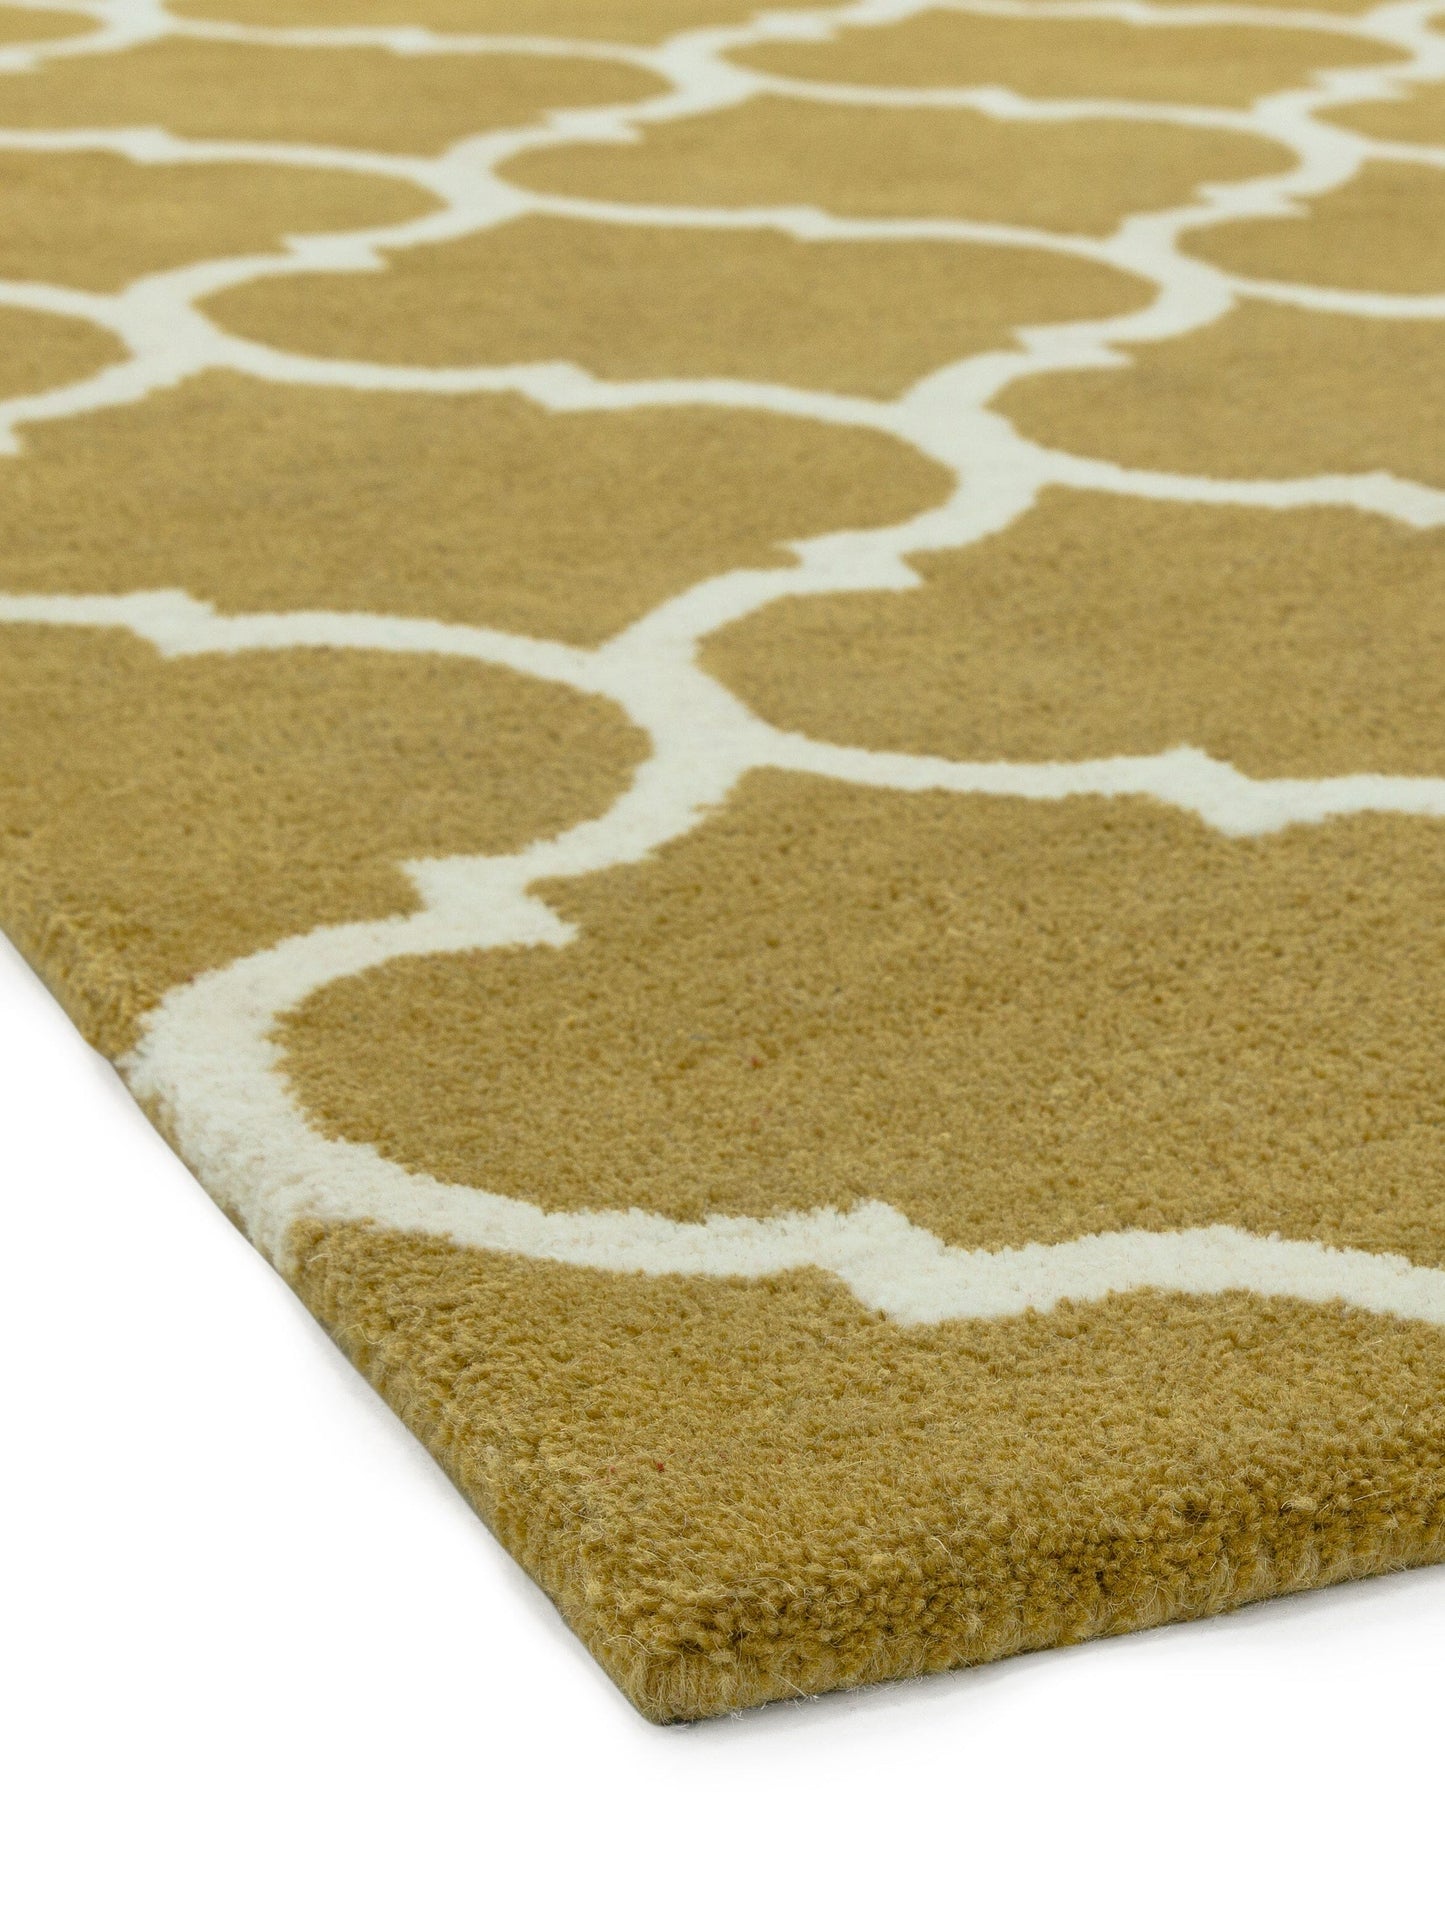 Asiatic Carpets Albany Handtufted Rug Ogee Ochre - 160 x 230cm